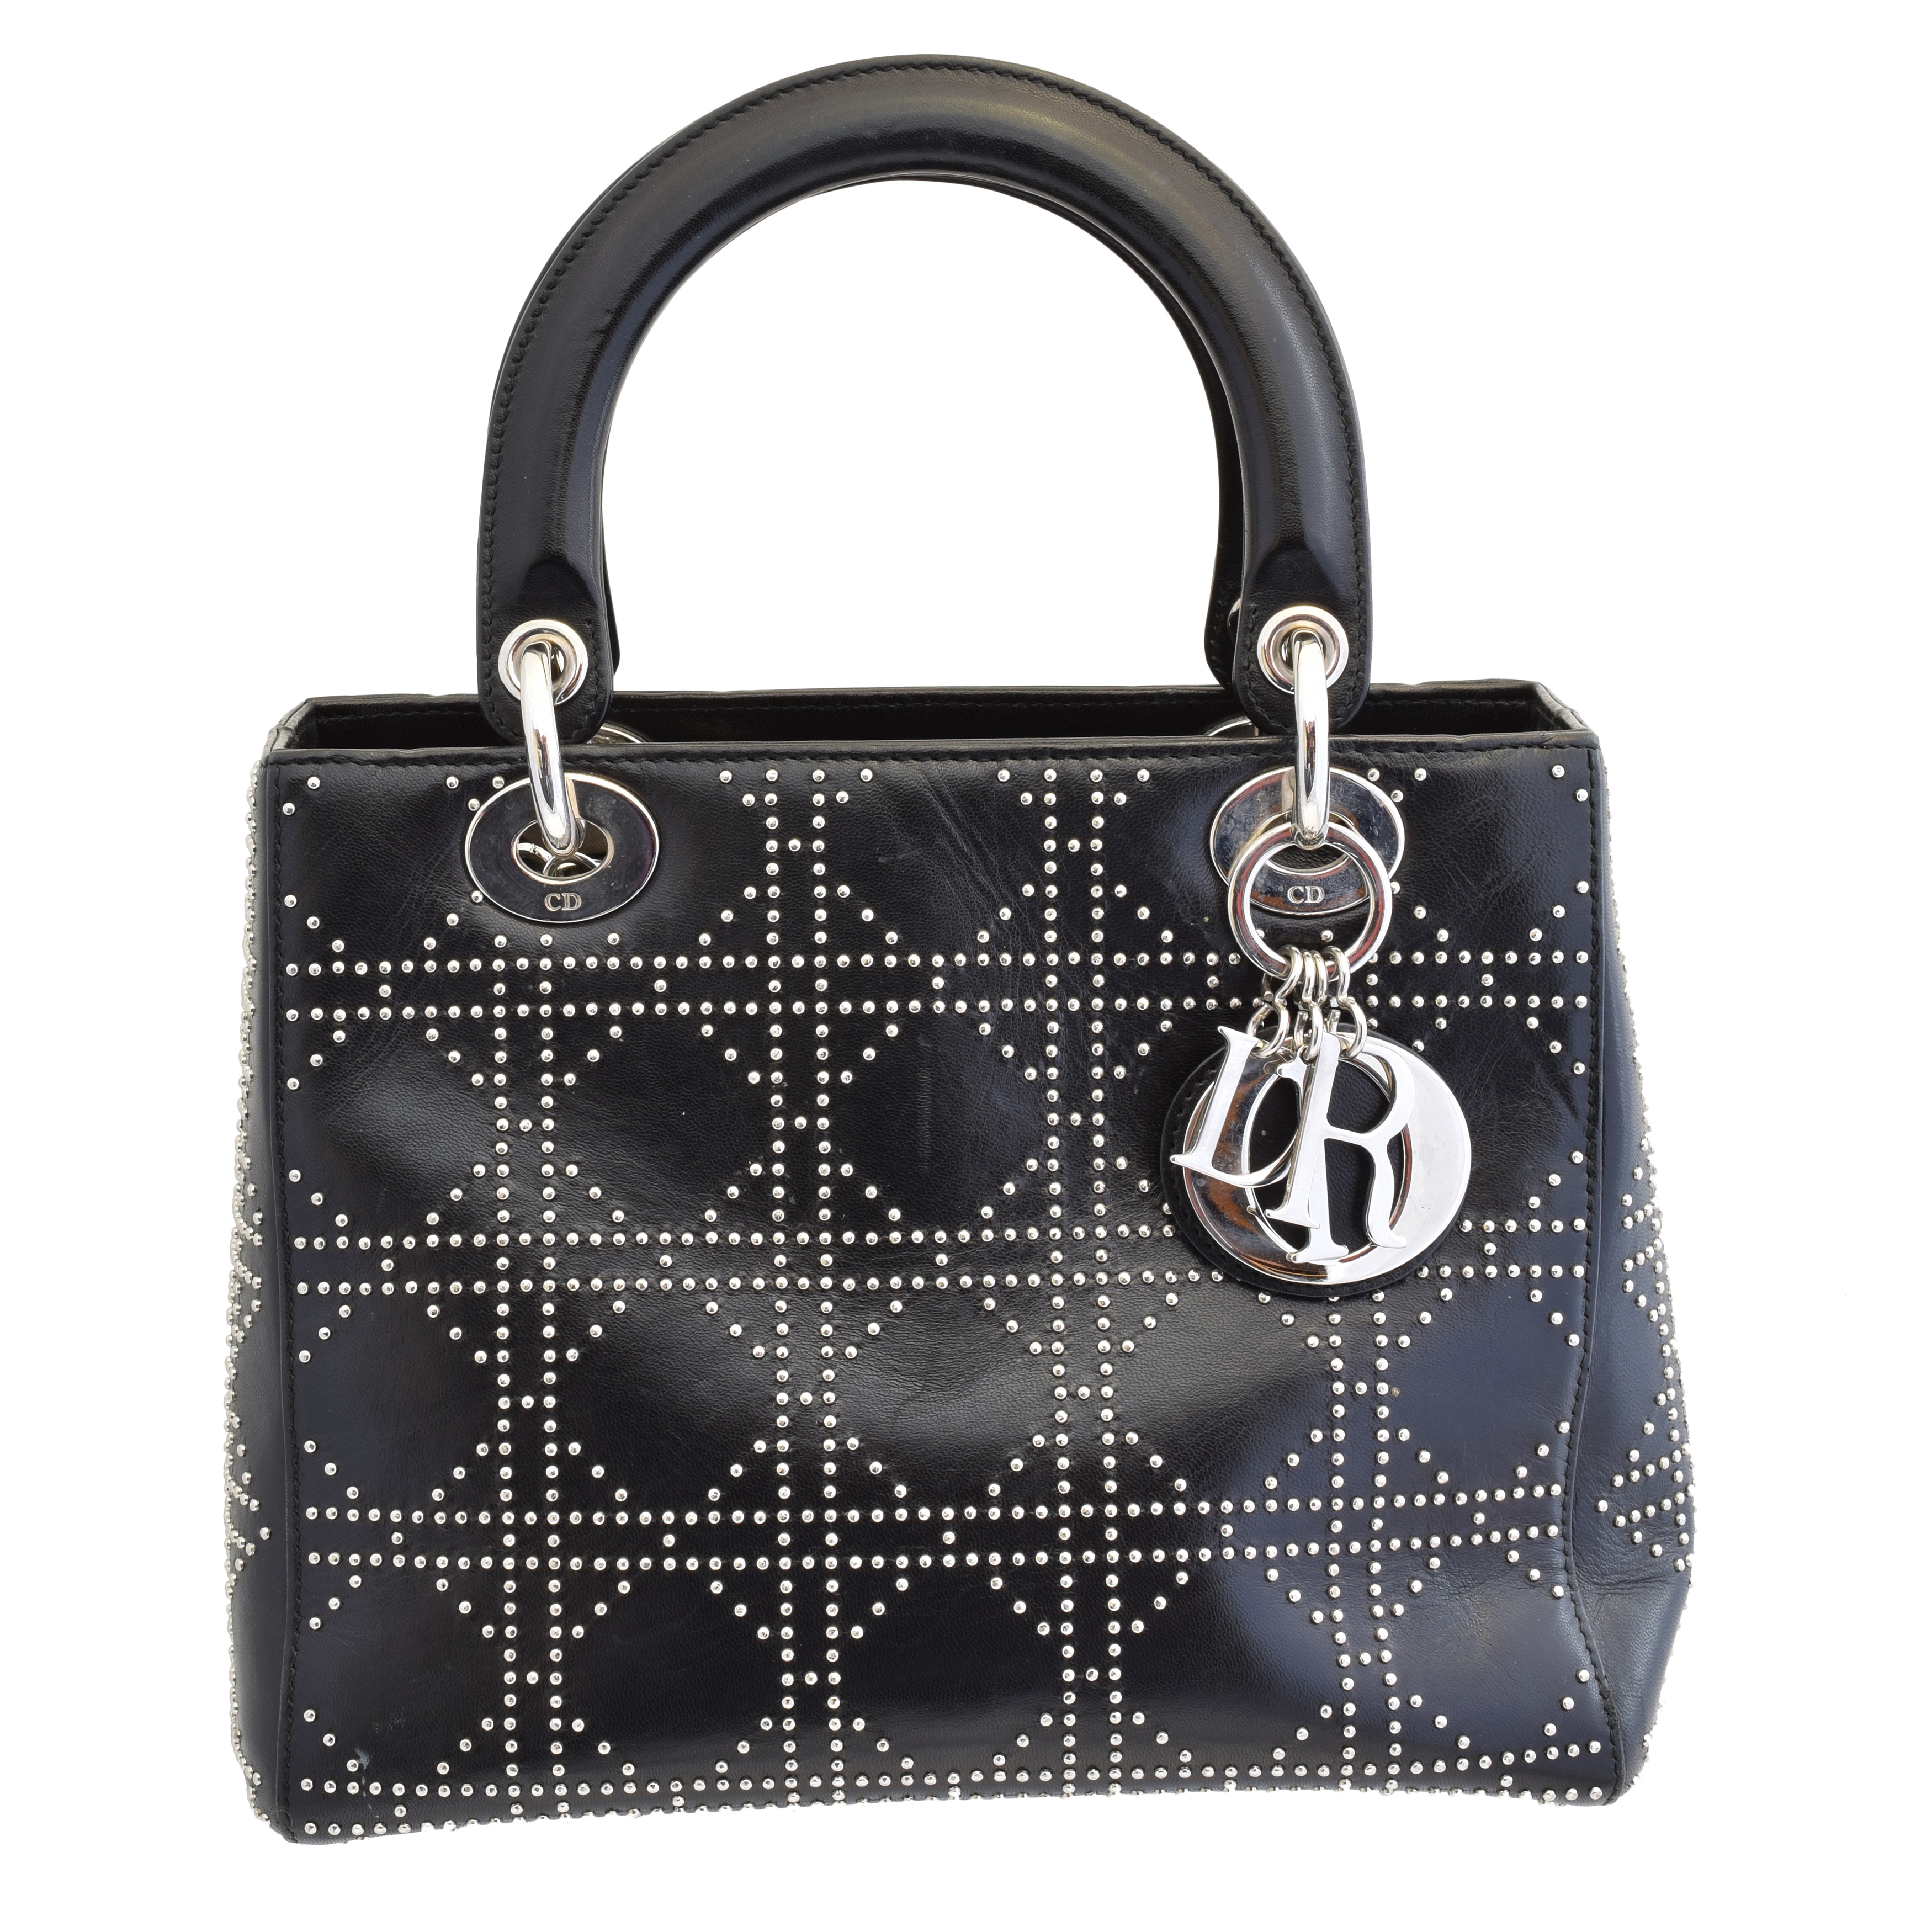 A Christian Dior Lady Dior MM bag, circa 2003, the black leather exterior with silver tone stud embellishment with double top handles and an optional shoulder strap, maker's logo charm, top zip fastening and one interior side pocket, serial no. 09-MA-0053 With maker's care guide, dust bag and authenticity card.